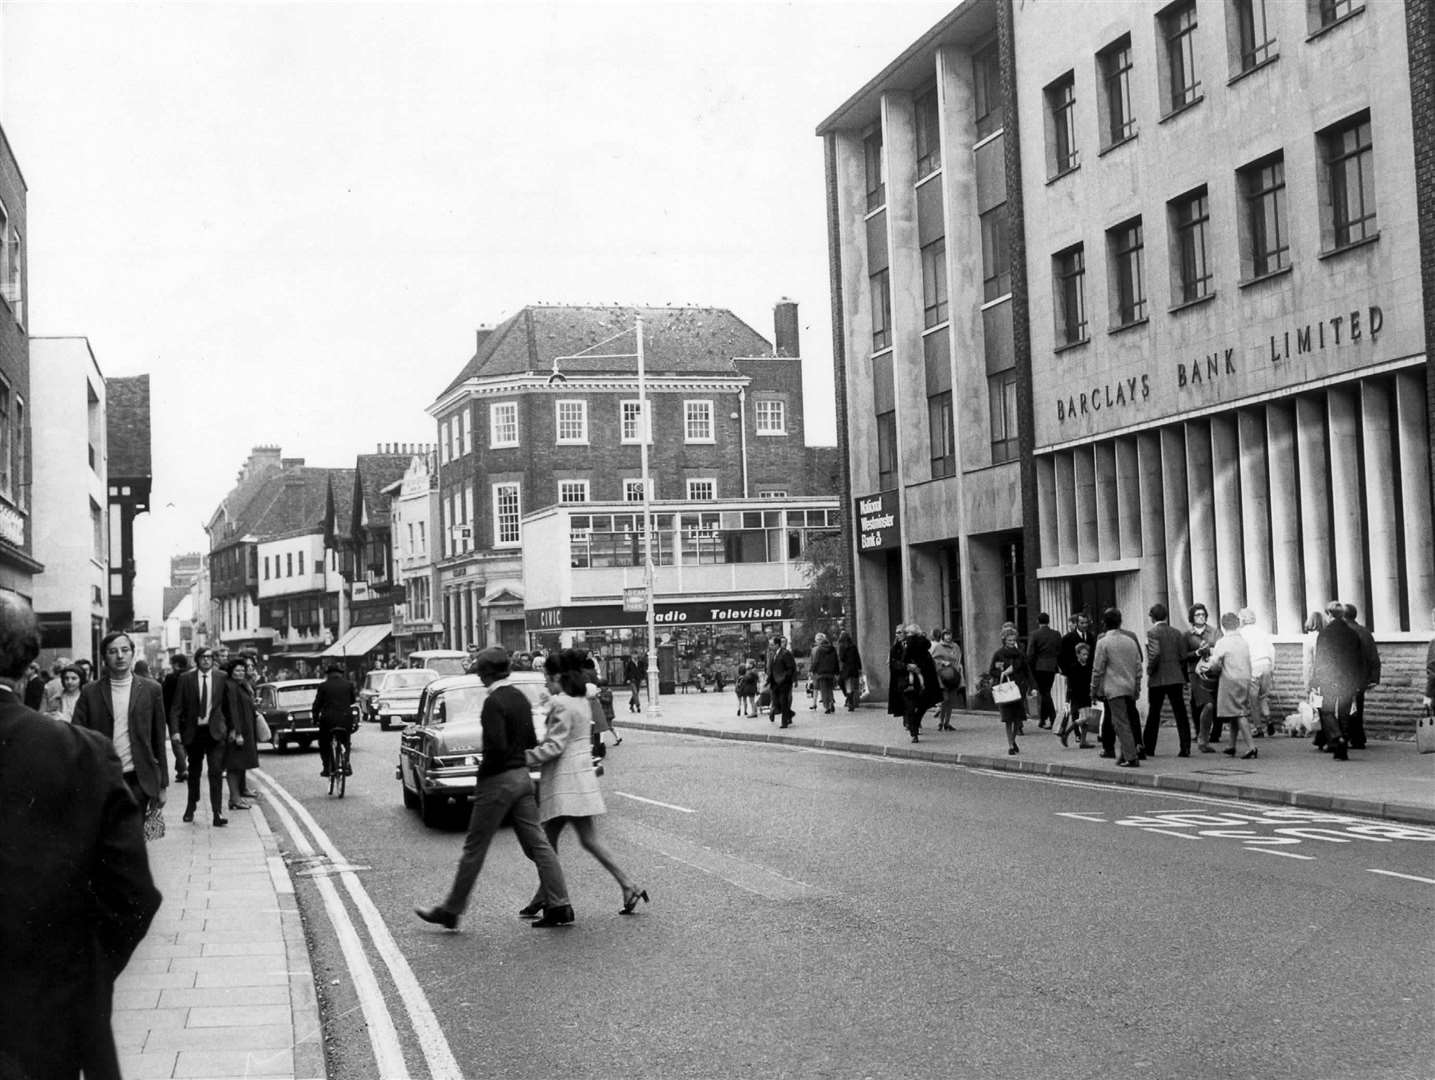 Looking towards the High Street from St George's Street in Canterbury in 1970